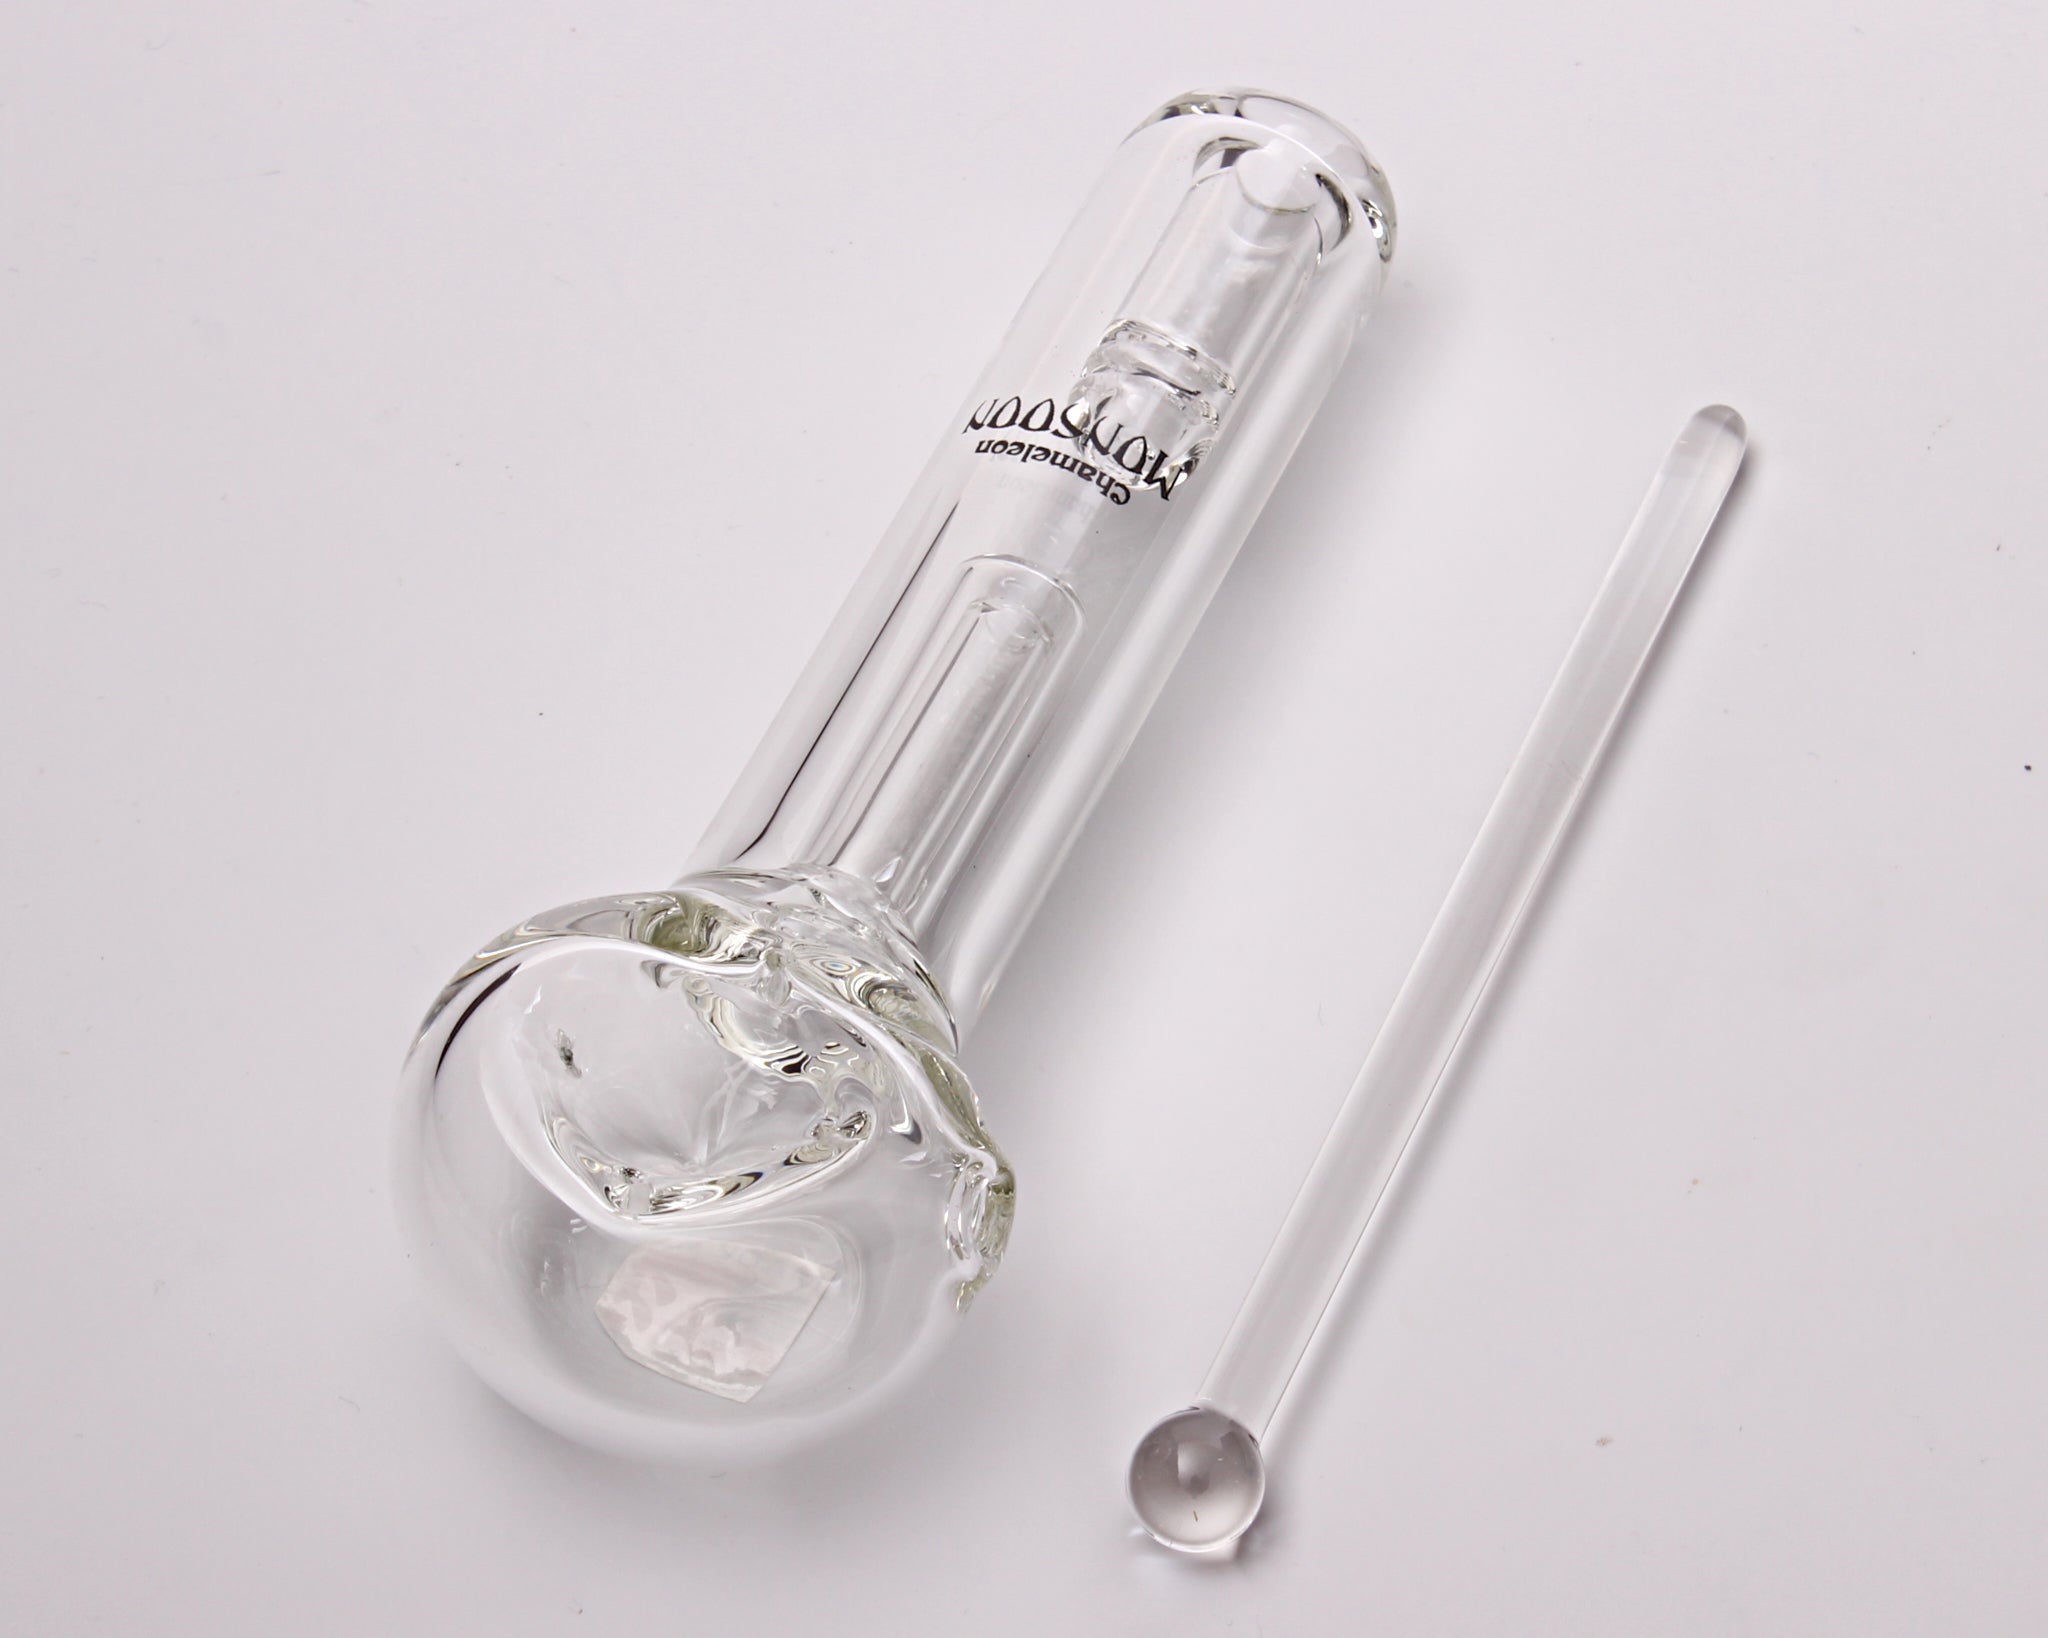 http://brotherswithglass.com/cdn/shop/products/chameleon-glass-spill-proof-monsoon-concentrate-spubbler-dab-rig-chameleon-glass-34927412347075.jpg?v=1668264158